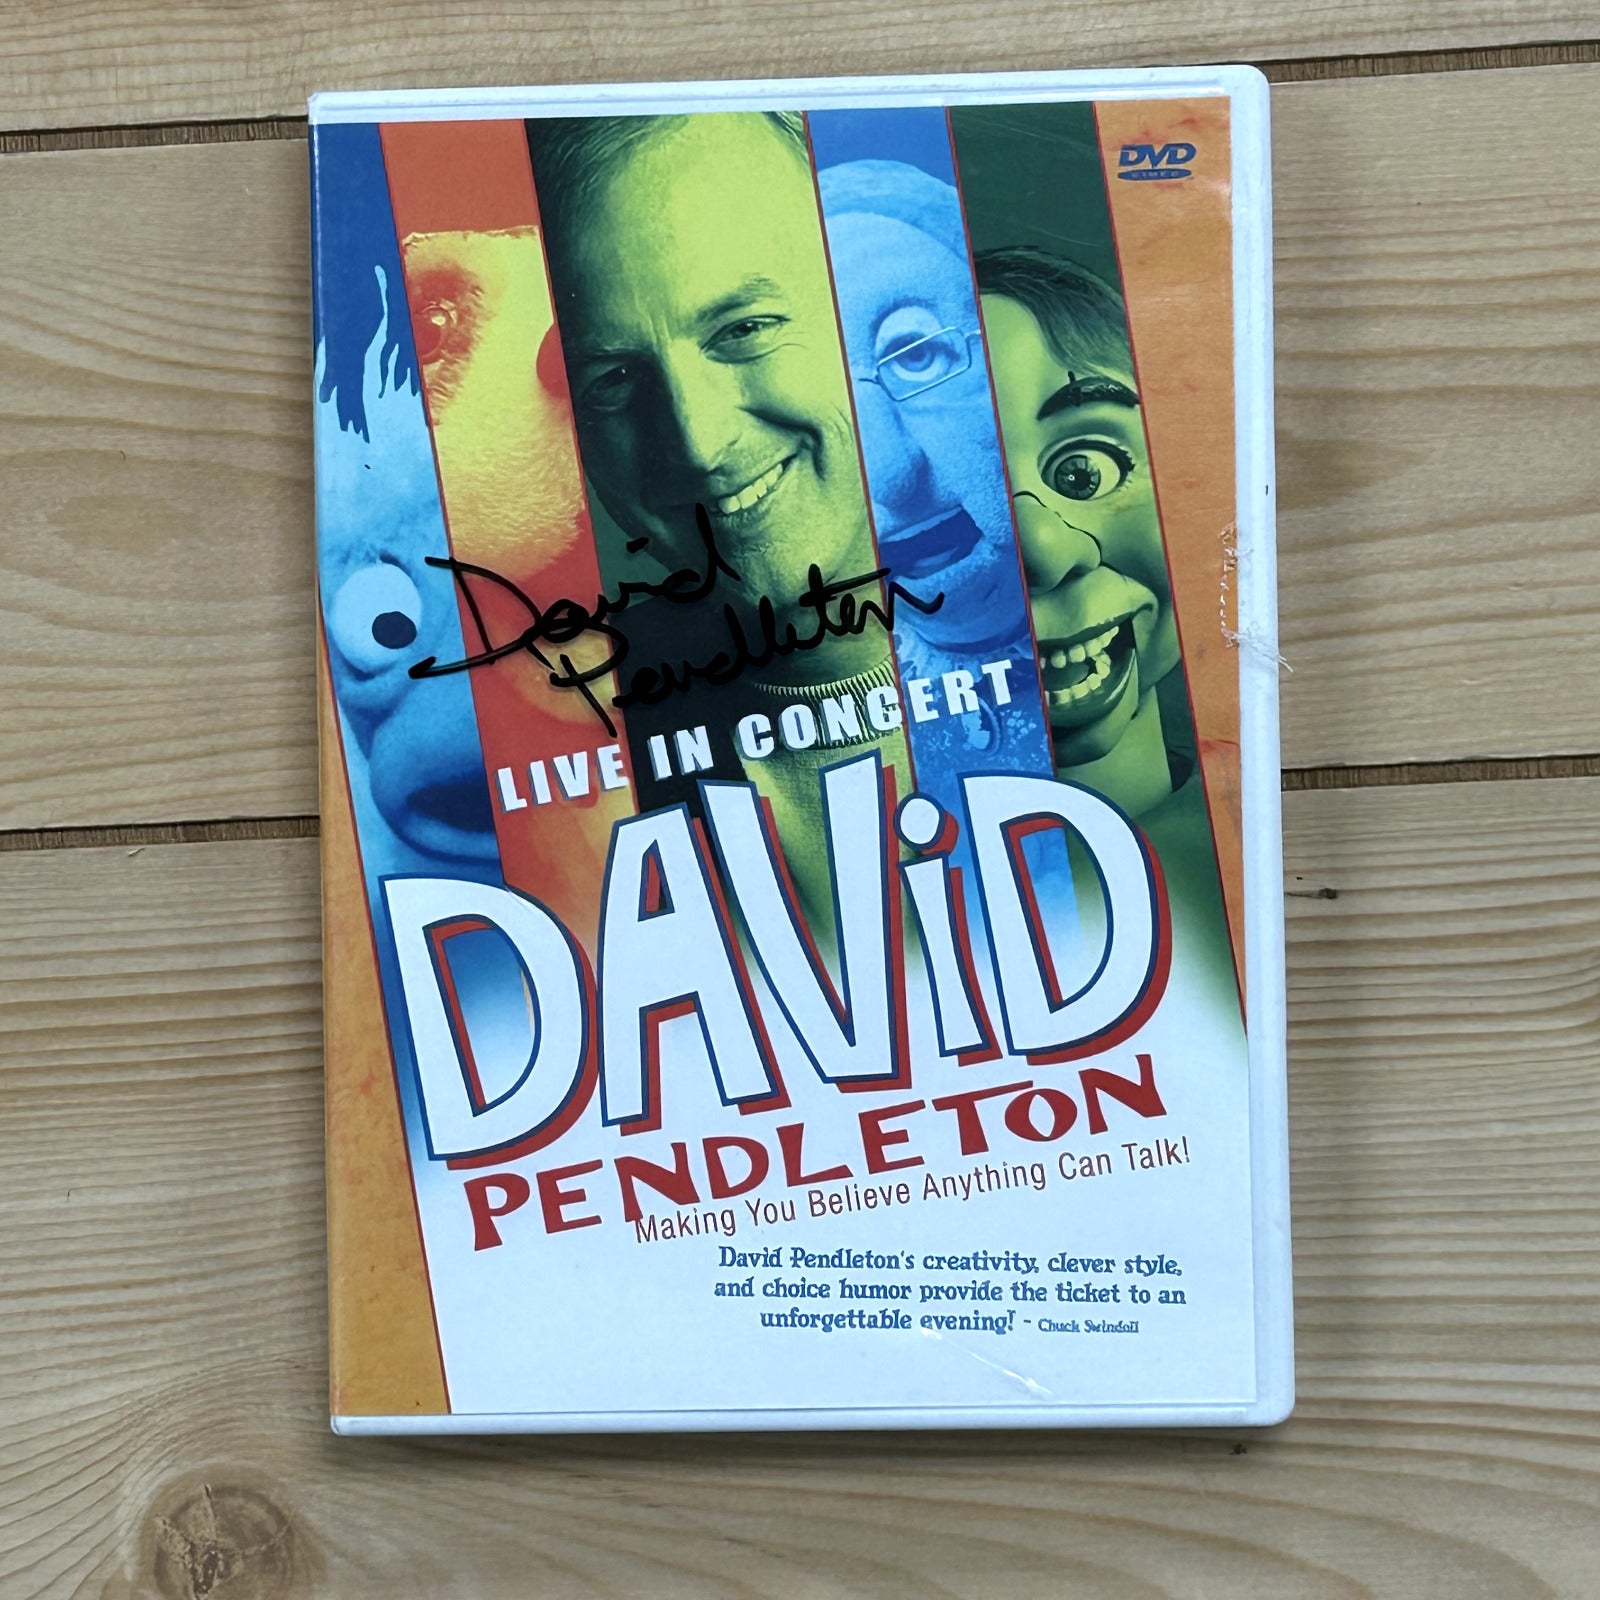 Making You Believe Anything Can Talk David Pendleton DVD 2004 Live - Autographed